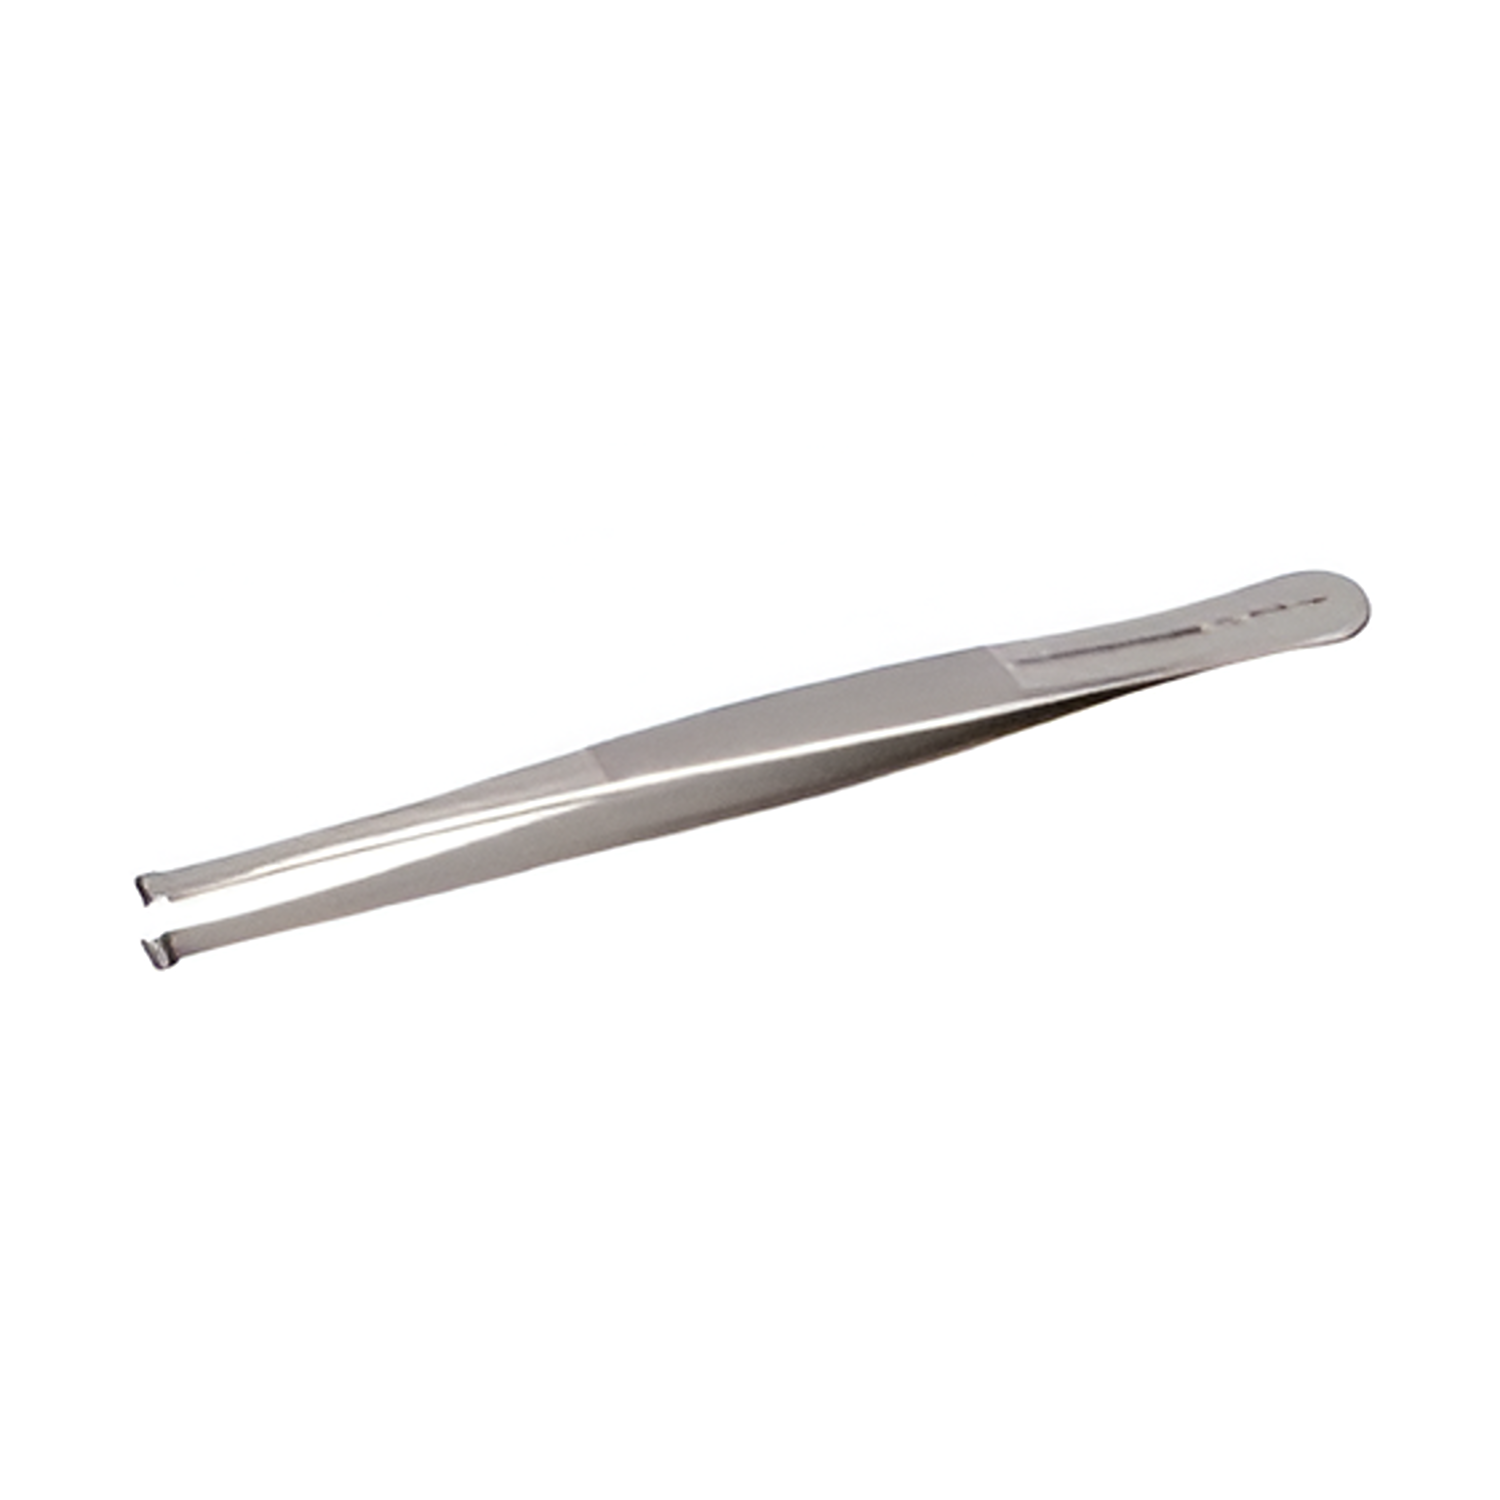 BAHCO TL 578-SA Tweezers with 6 mm 90° Angled Tips - Premium Tweezers from BAHCO - Shop now at Yew Aik.